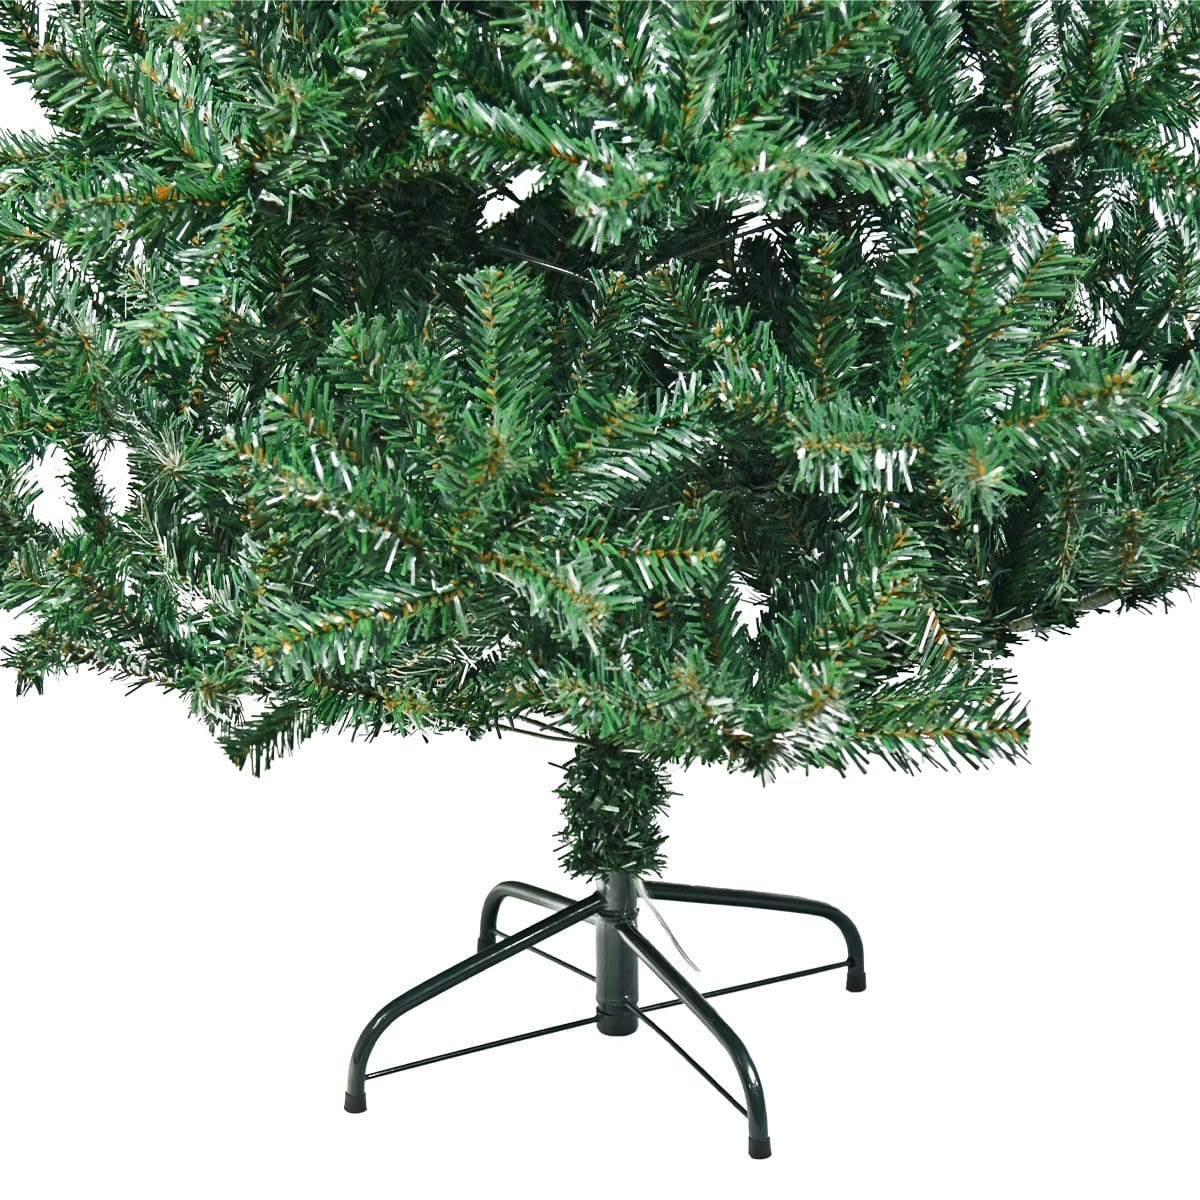 Christabelle Green Artificial Christmas Tree 1.8M - 850 Tips